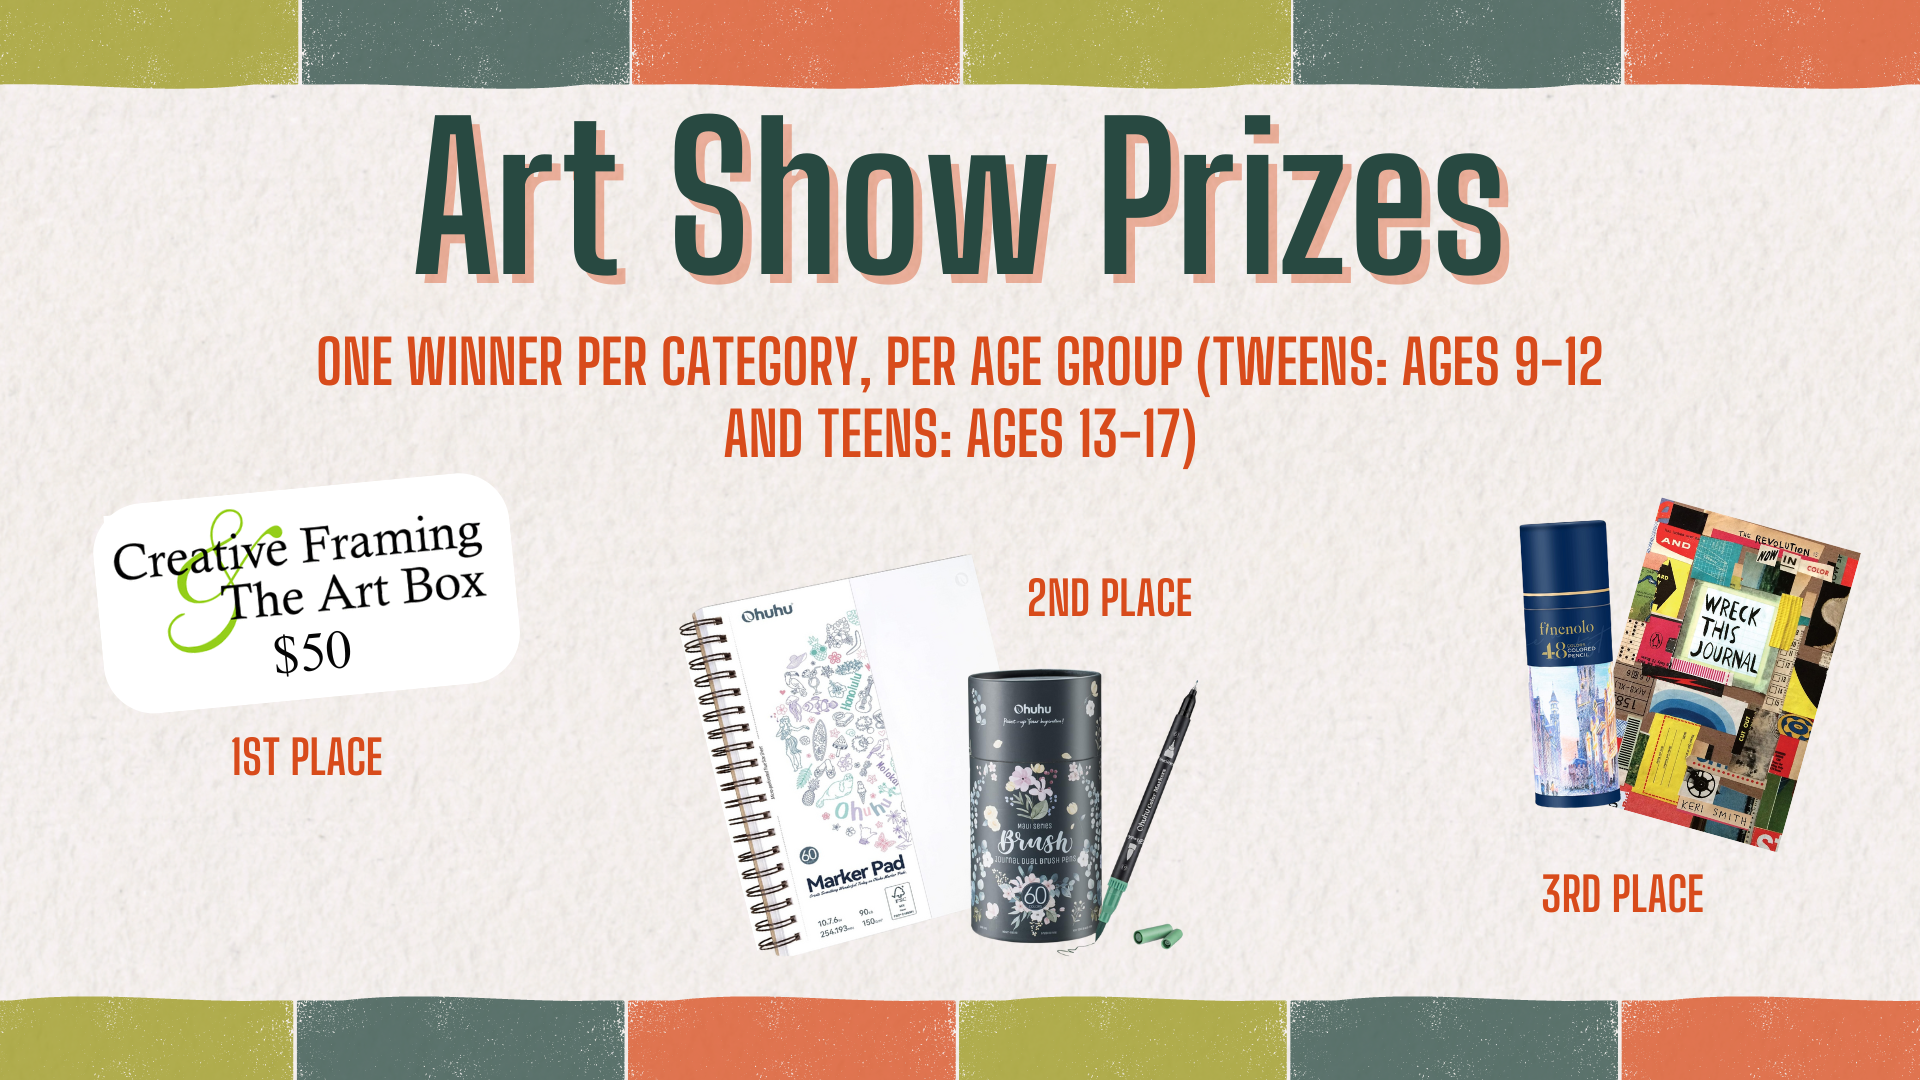 Tween and Teen Art Show prizes: One winner per category, per age group (tweens: ages 9 to 12; teens: ages 13 to 17). 1st place: $50 certificate for The Art Box. 2nd place: Brush pen set and marker drawing pad. 3rd place: "Wreck This Journal" book and set of colored pencils